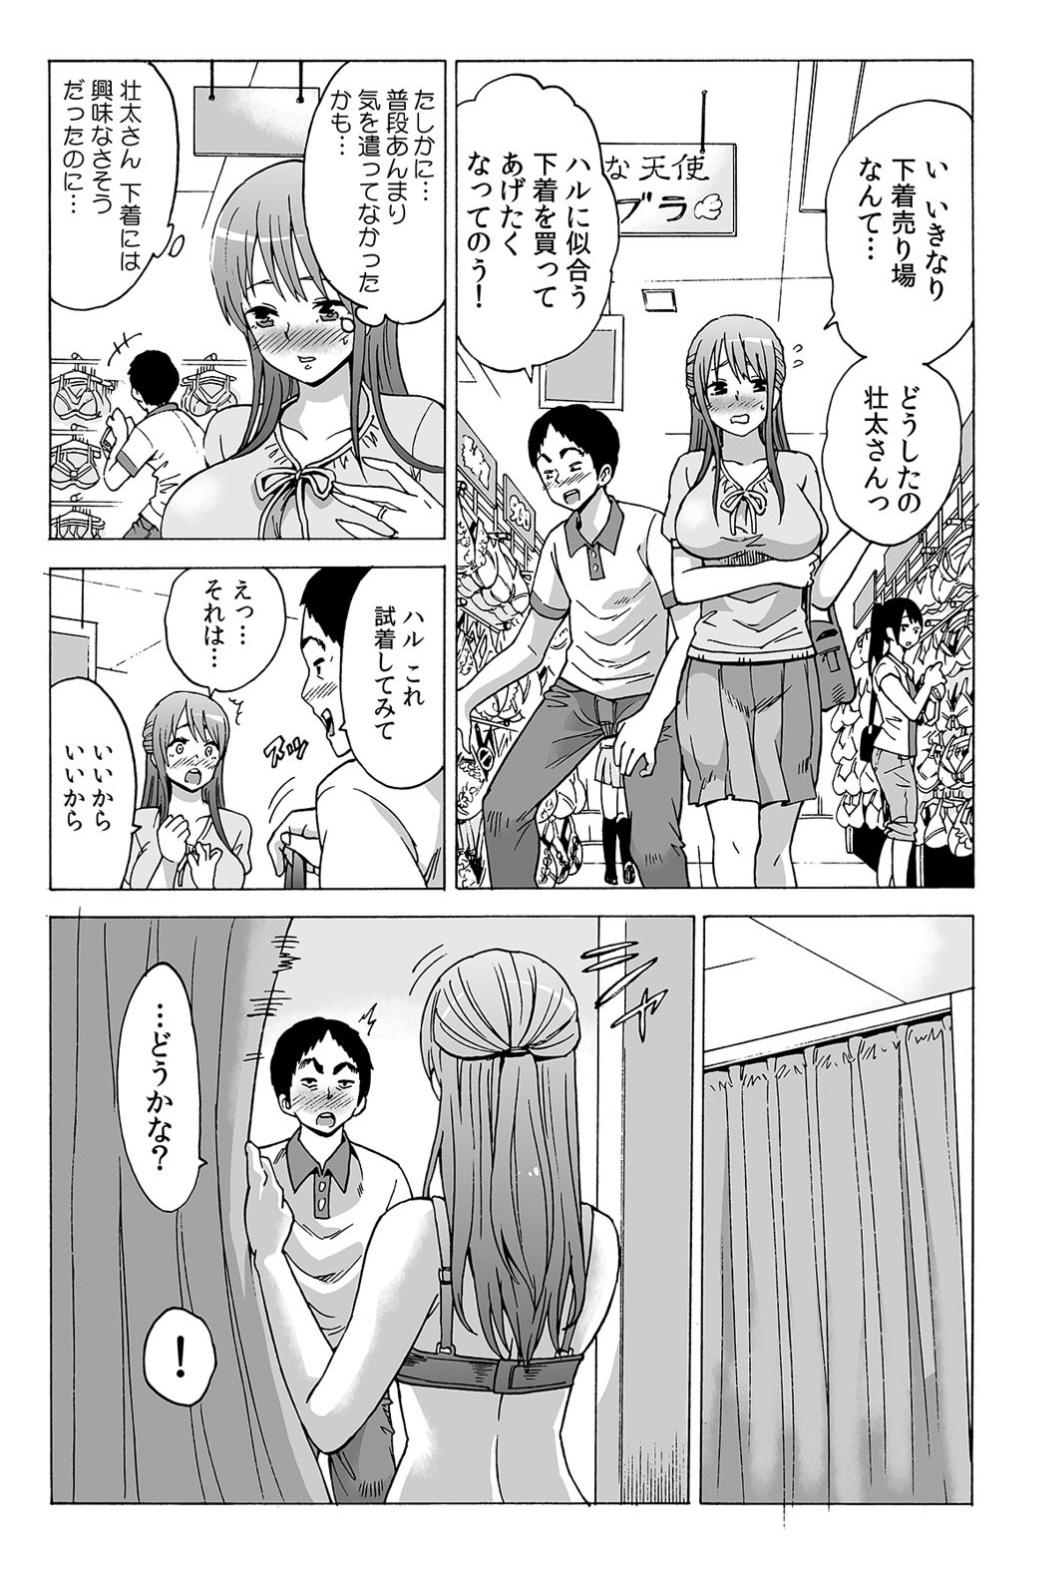 [Motaro / Akahige] My first partner is ... my father-in-law!? 1 30